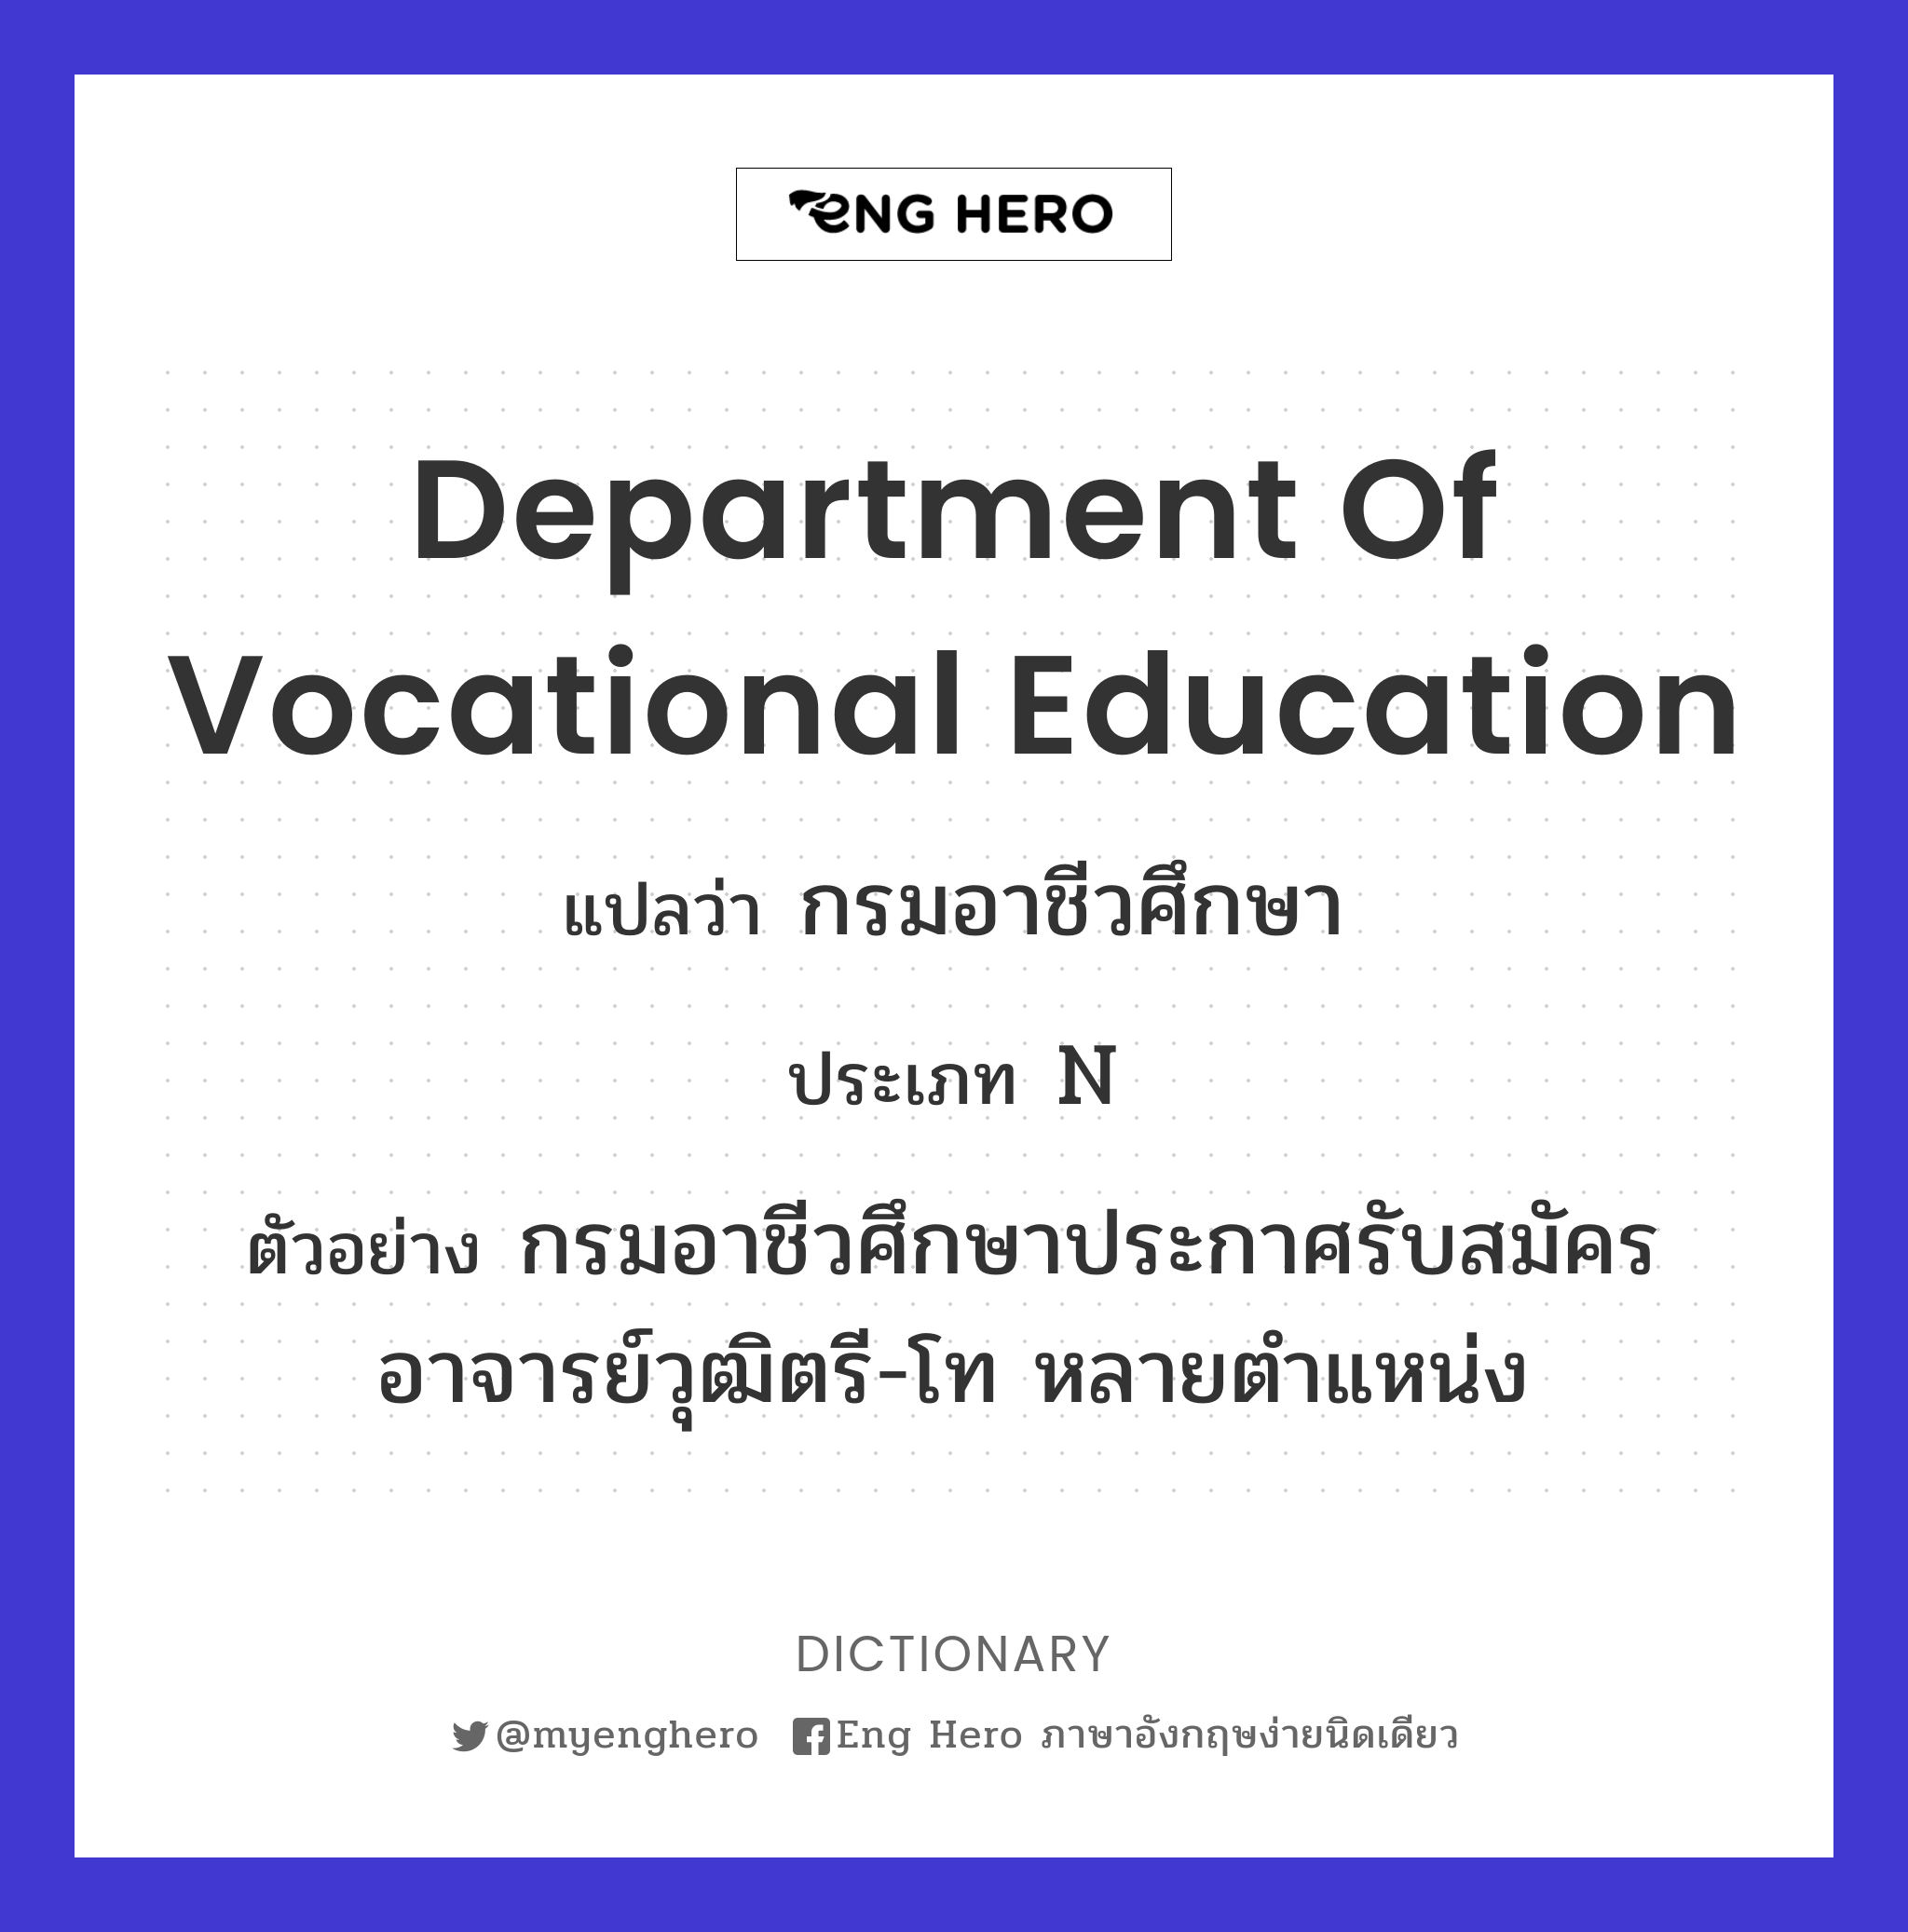 Department of Vocational Education